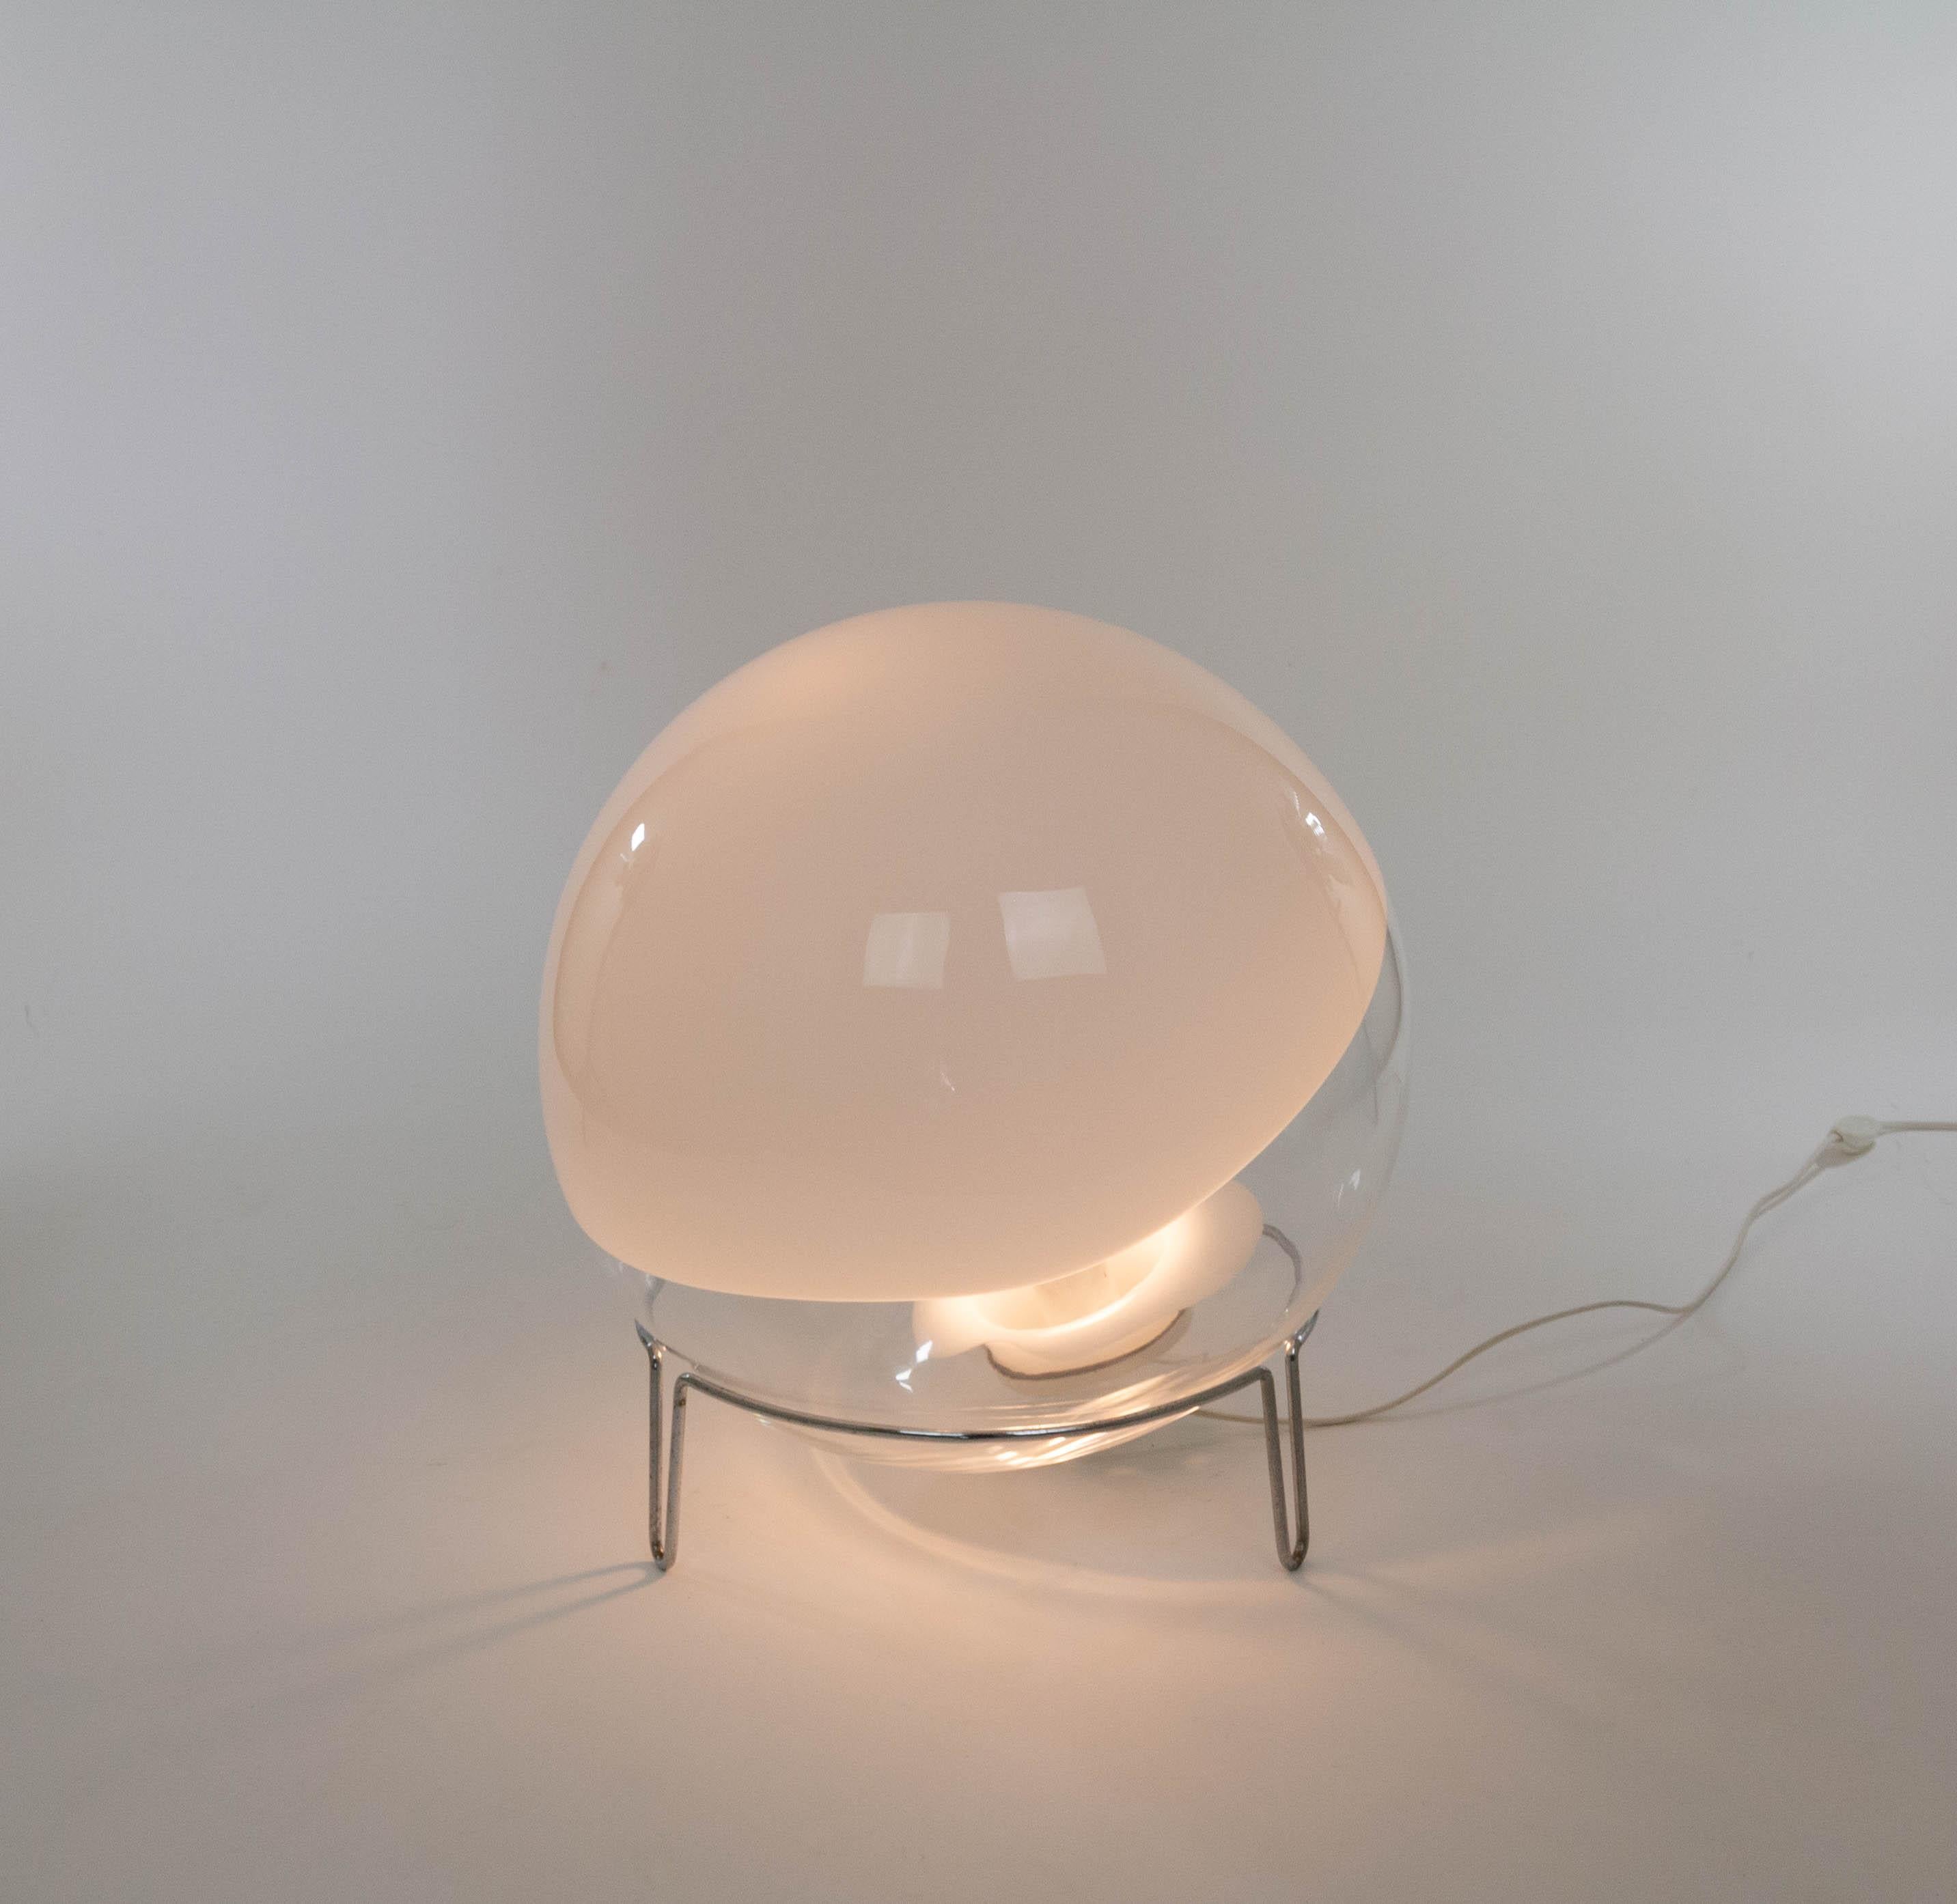 A Sfera table or floor lamp designed by Angelo Mangiarotti for Skipper Pollux, 1980s.

The lamp consists of white and transparent Murano glass and a chromed metal frame. The glass sphere can be positioned in all directions in the metal frame. The